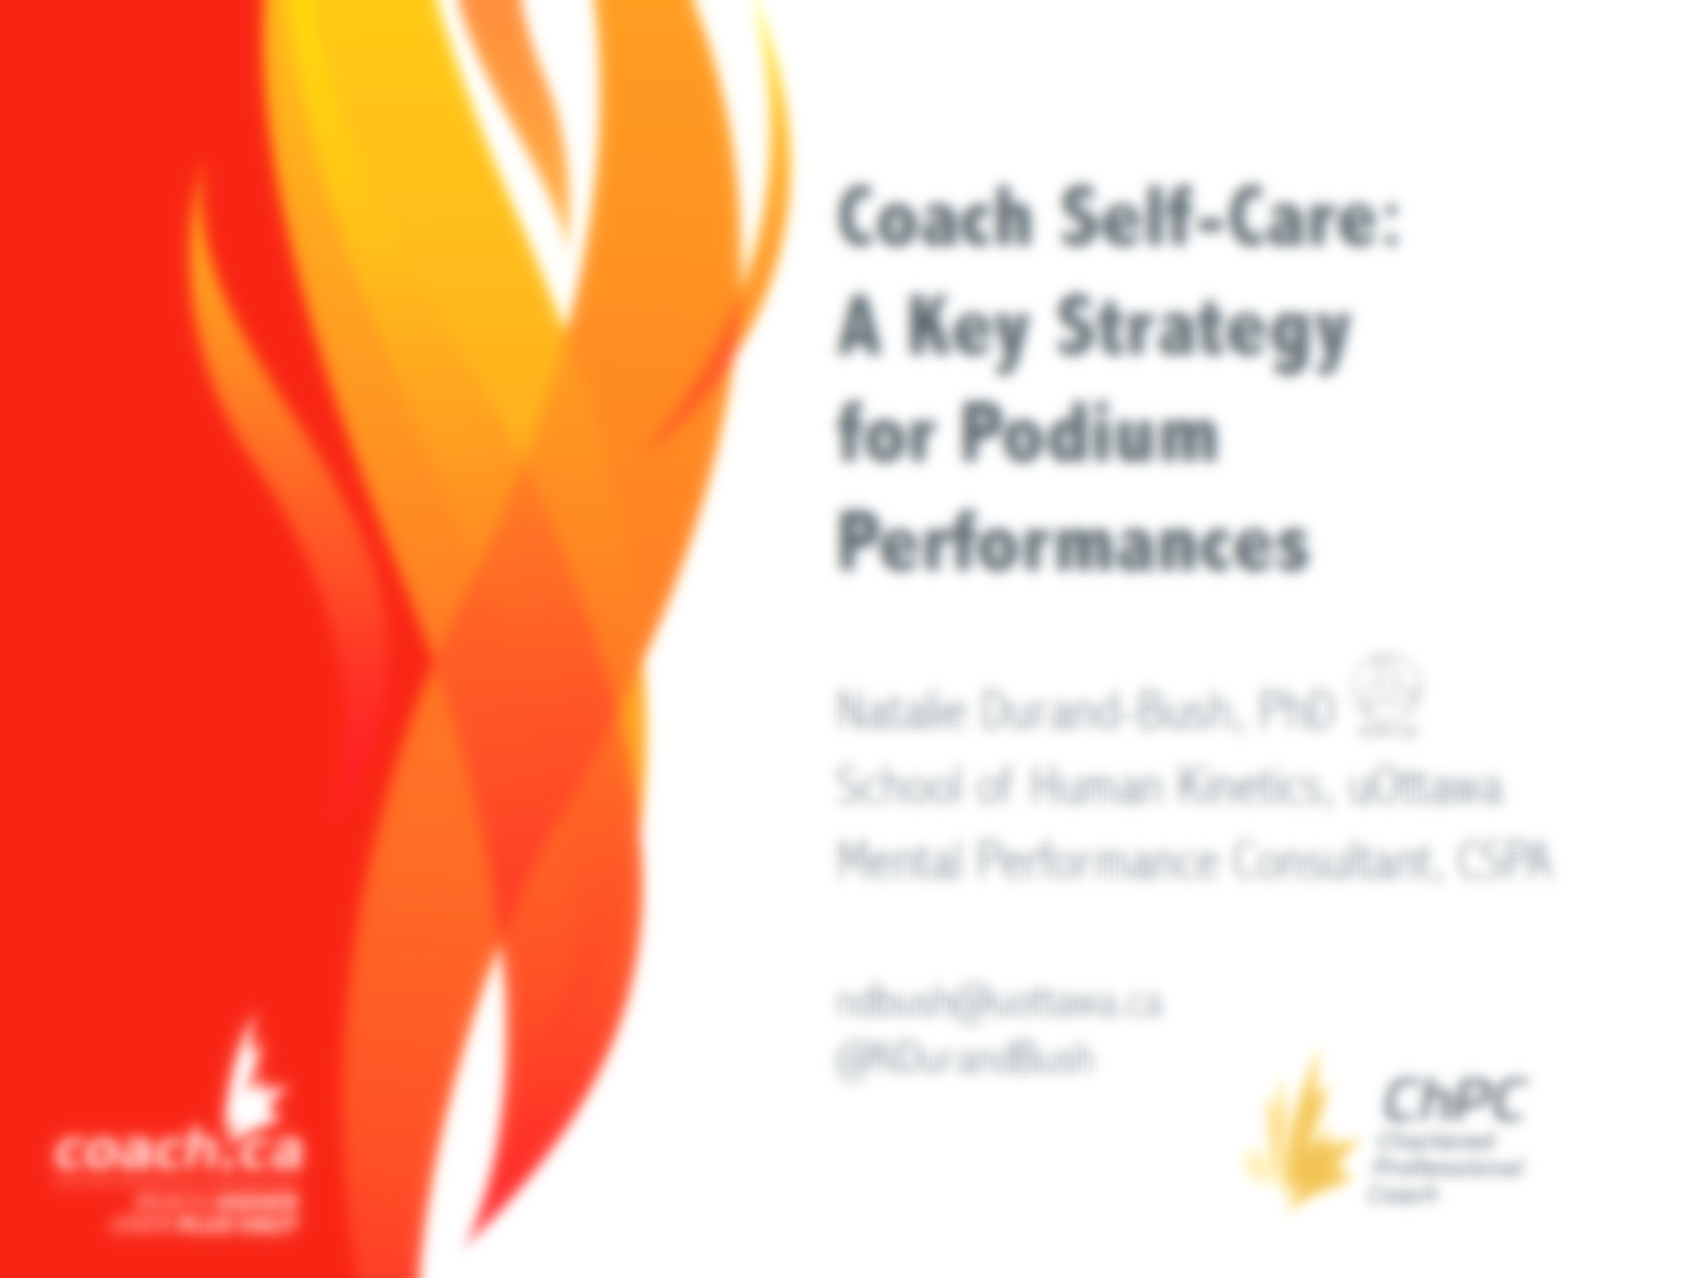 Daily self-care program for coaches